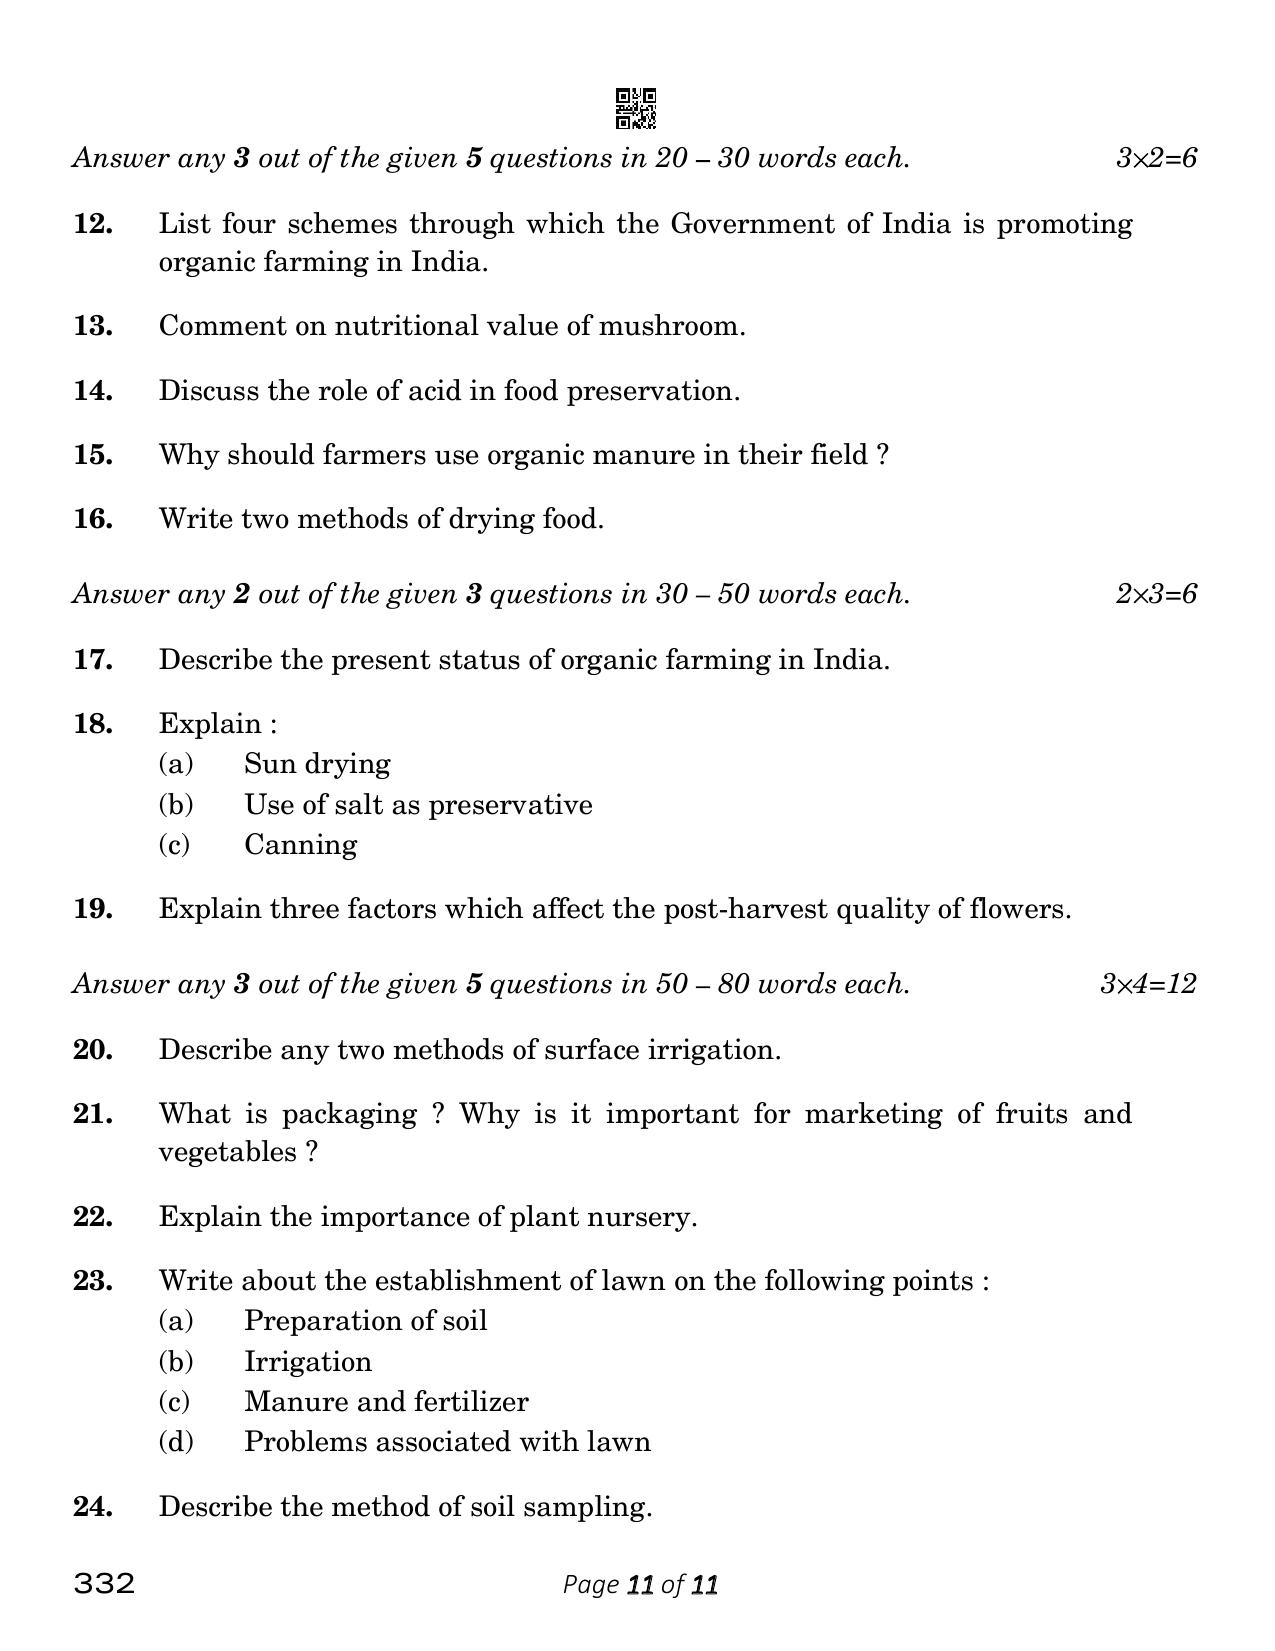 CBSE Class 12 Agriculture (Compartment) 2023 Question Paper - Page 11